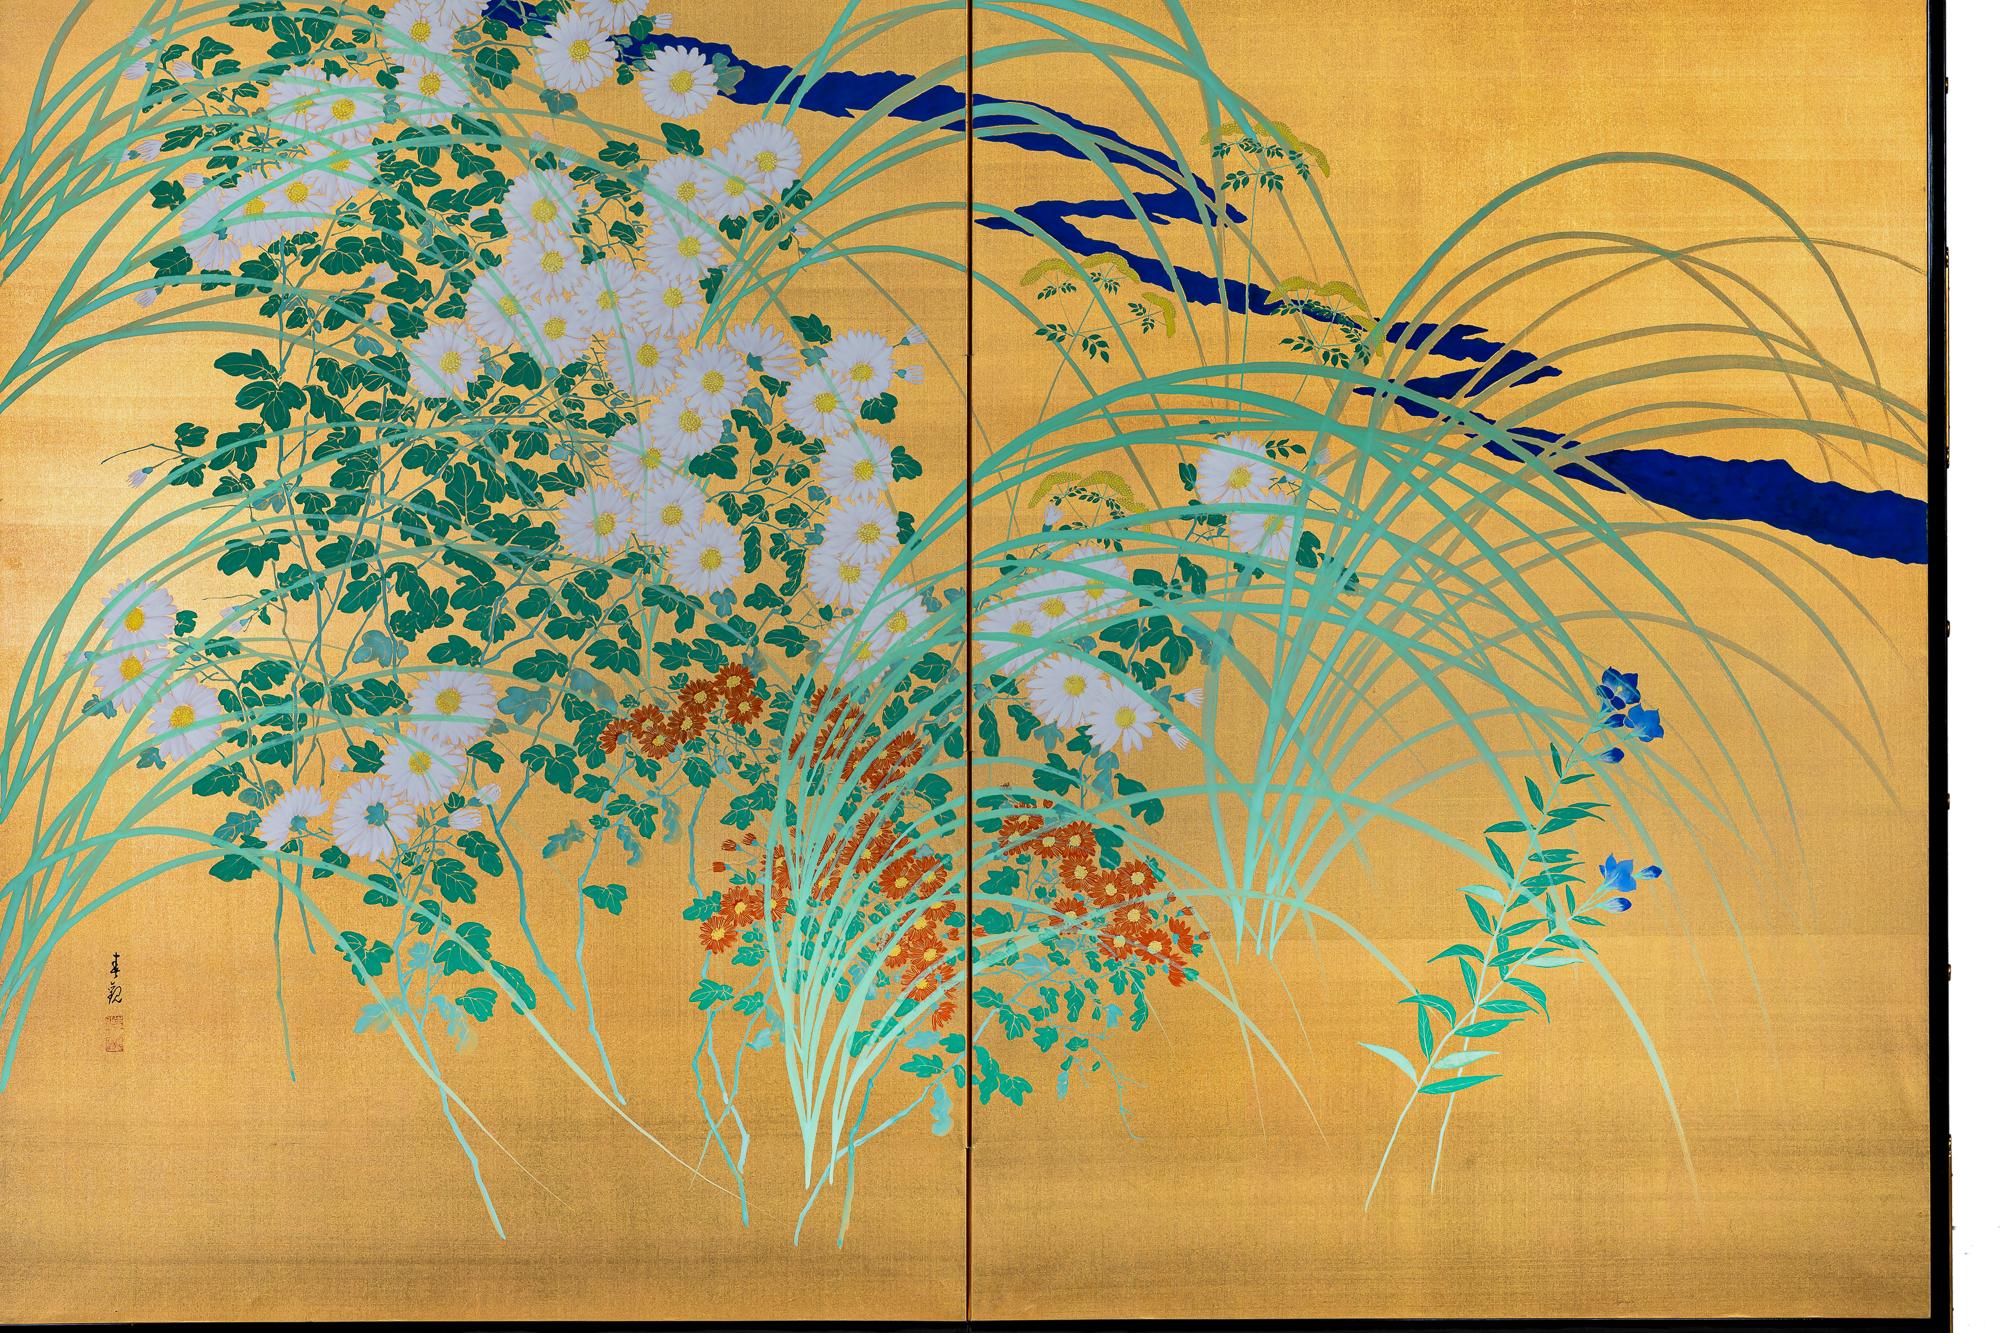 Mineral pigments on gilded silk with gilded bronze hardware. Signature reads: Shunkan.